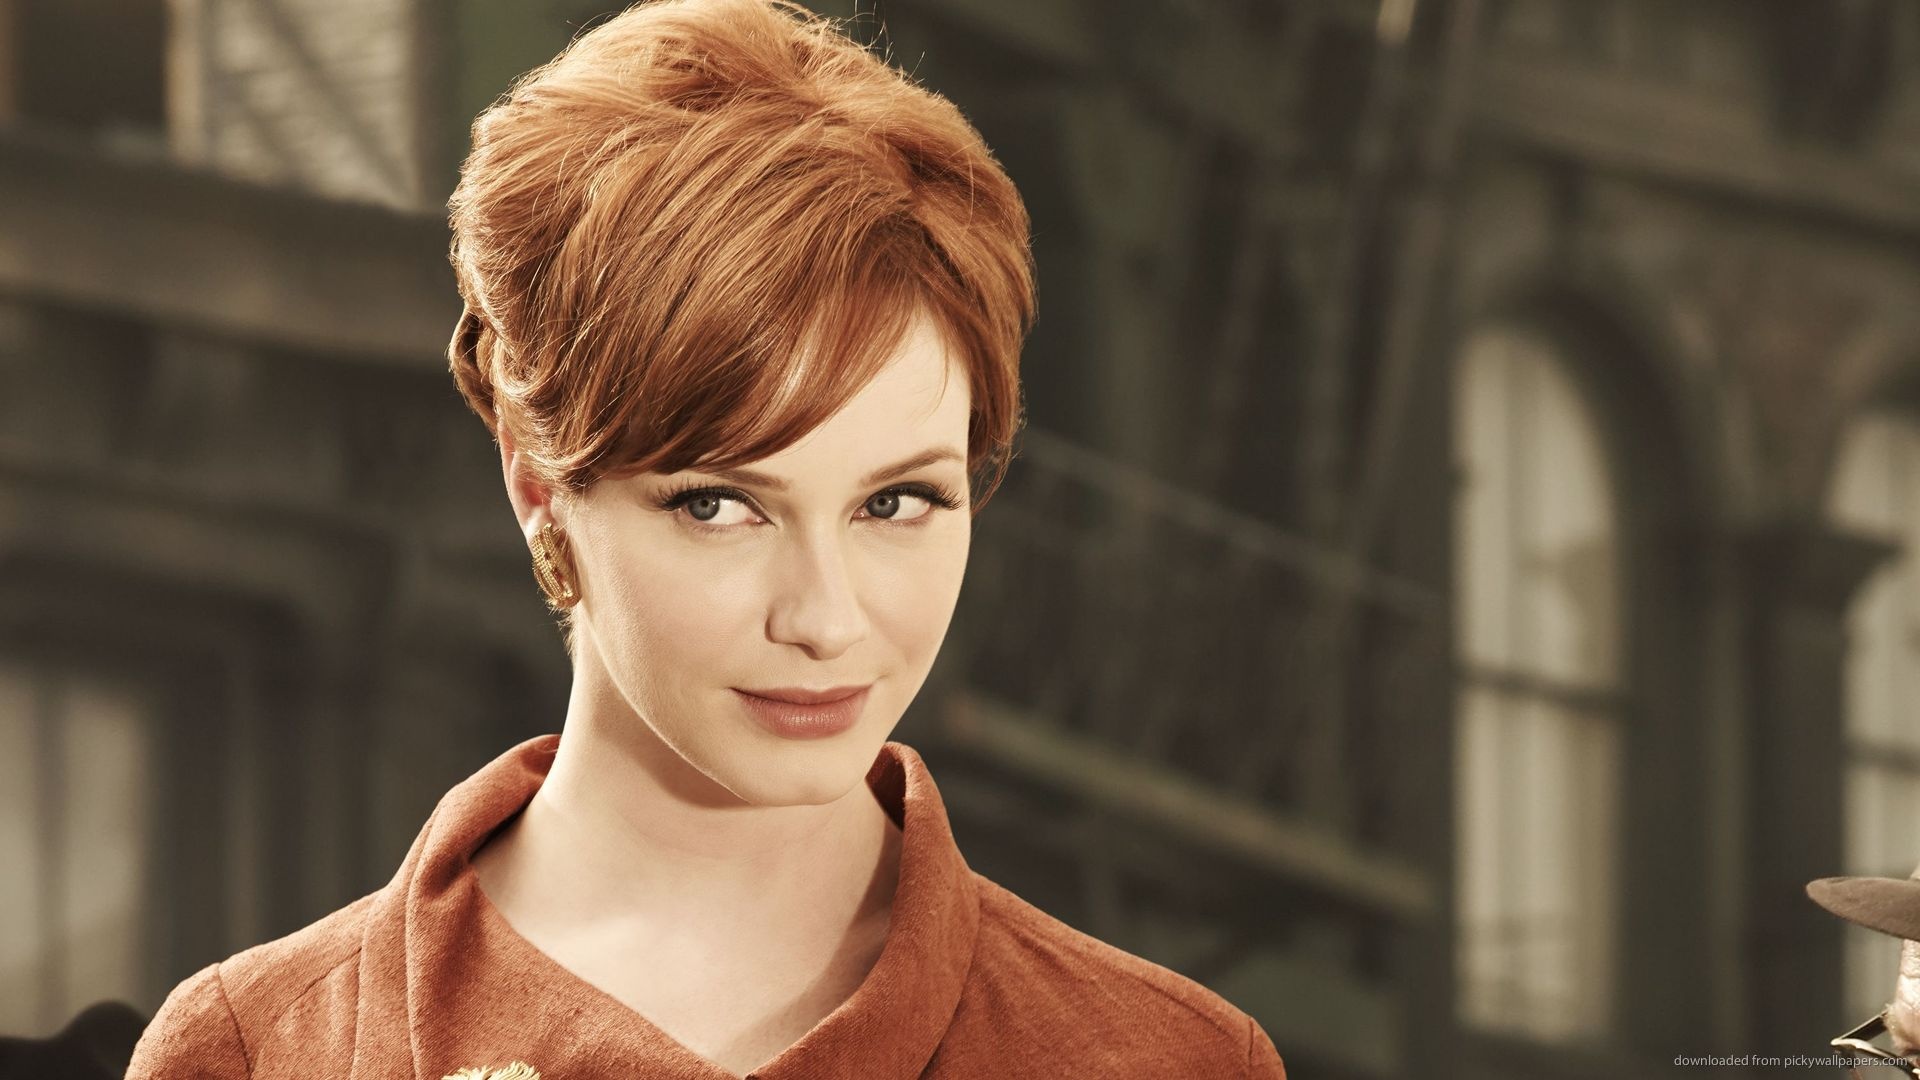 Mad Men (TV Series): Christina Hendricks, American actress and former model, "Best Looking Woman in America". 1920x1080 Full HD Wallpaper.